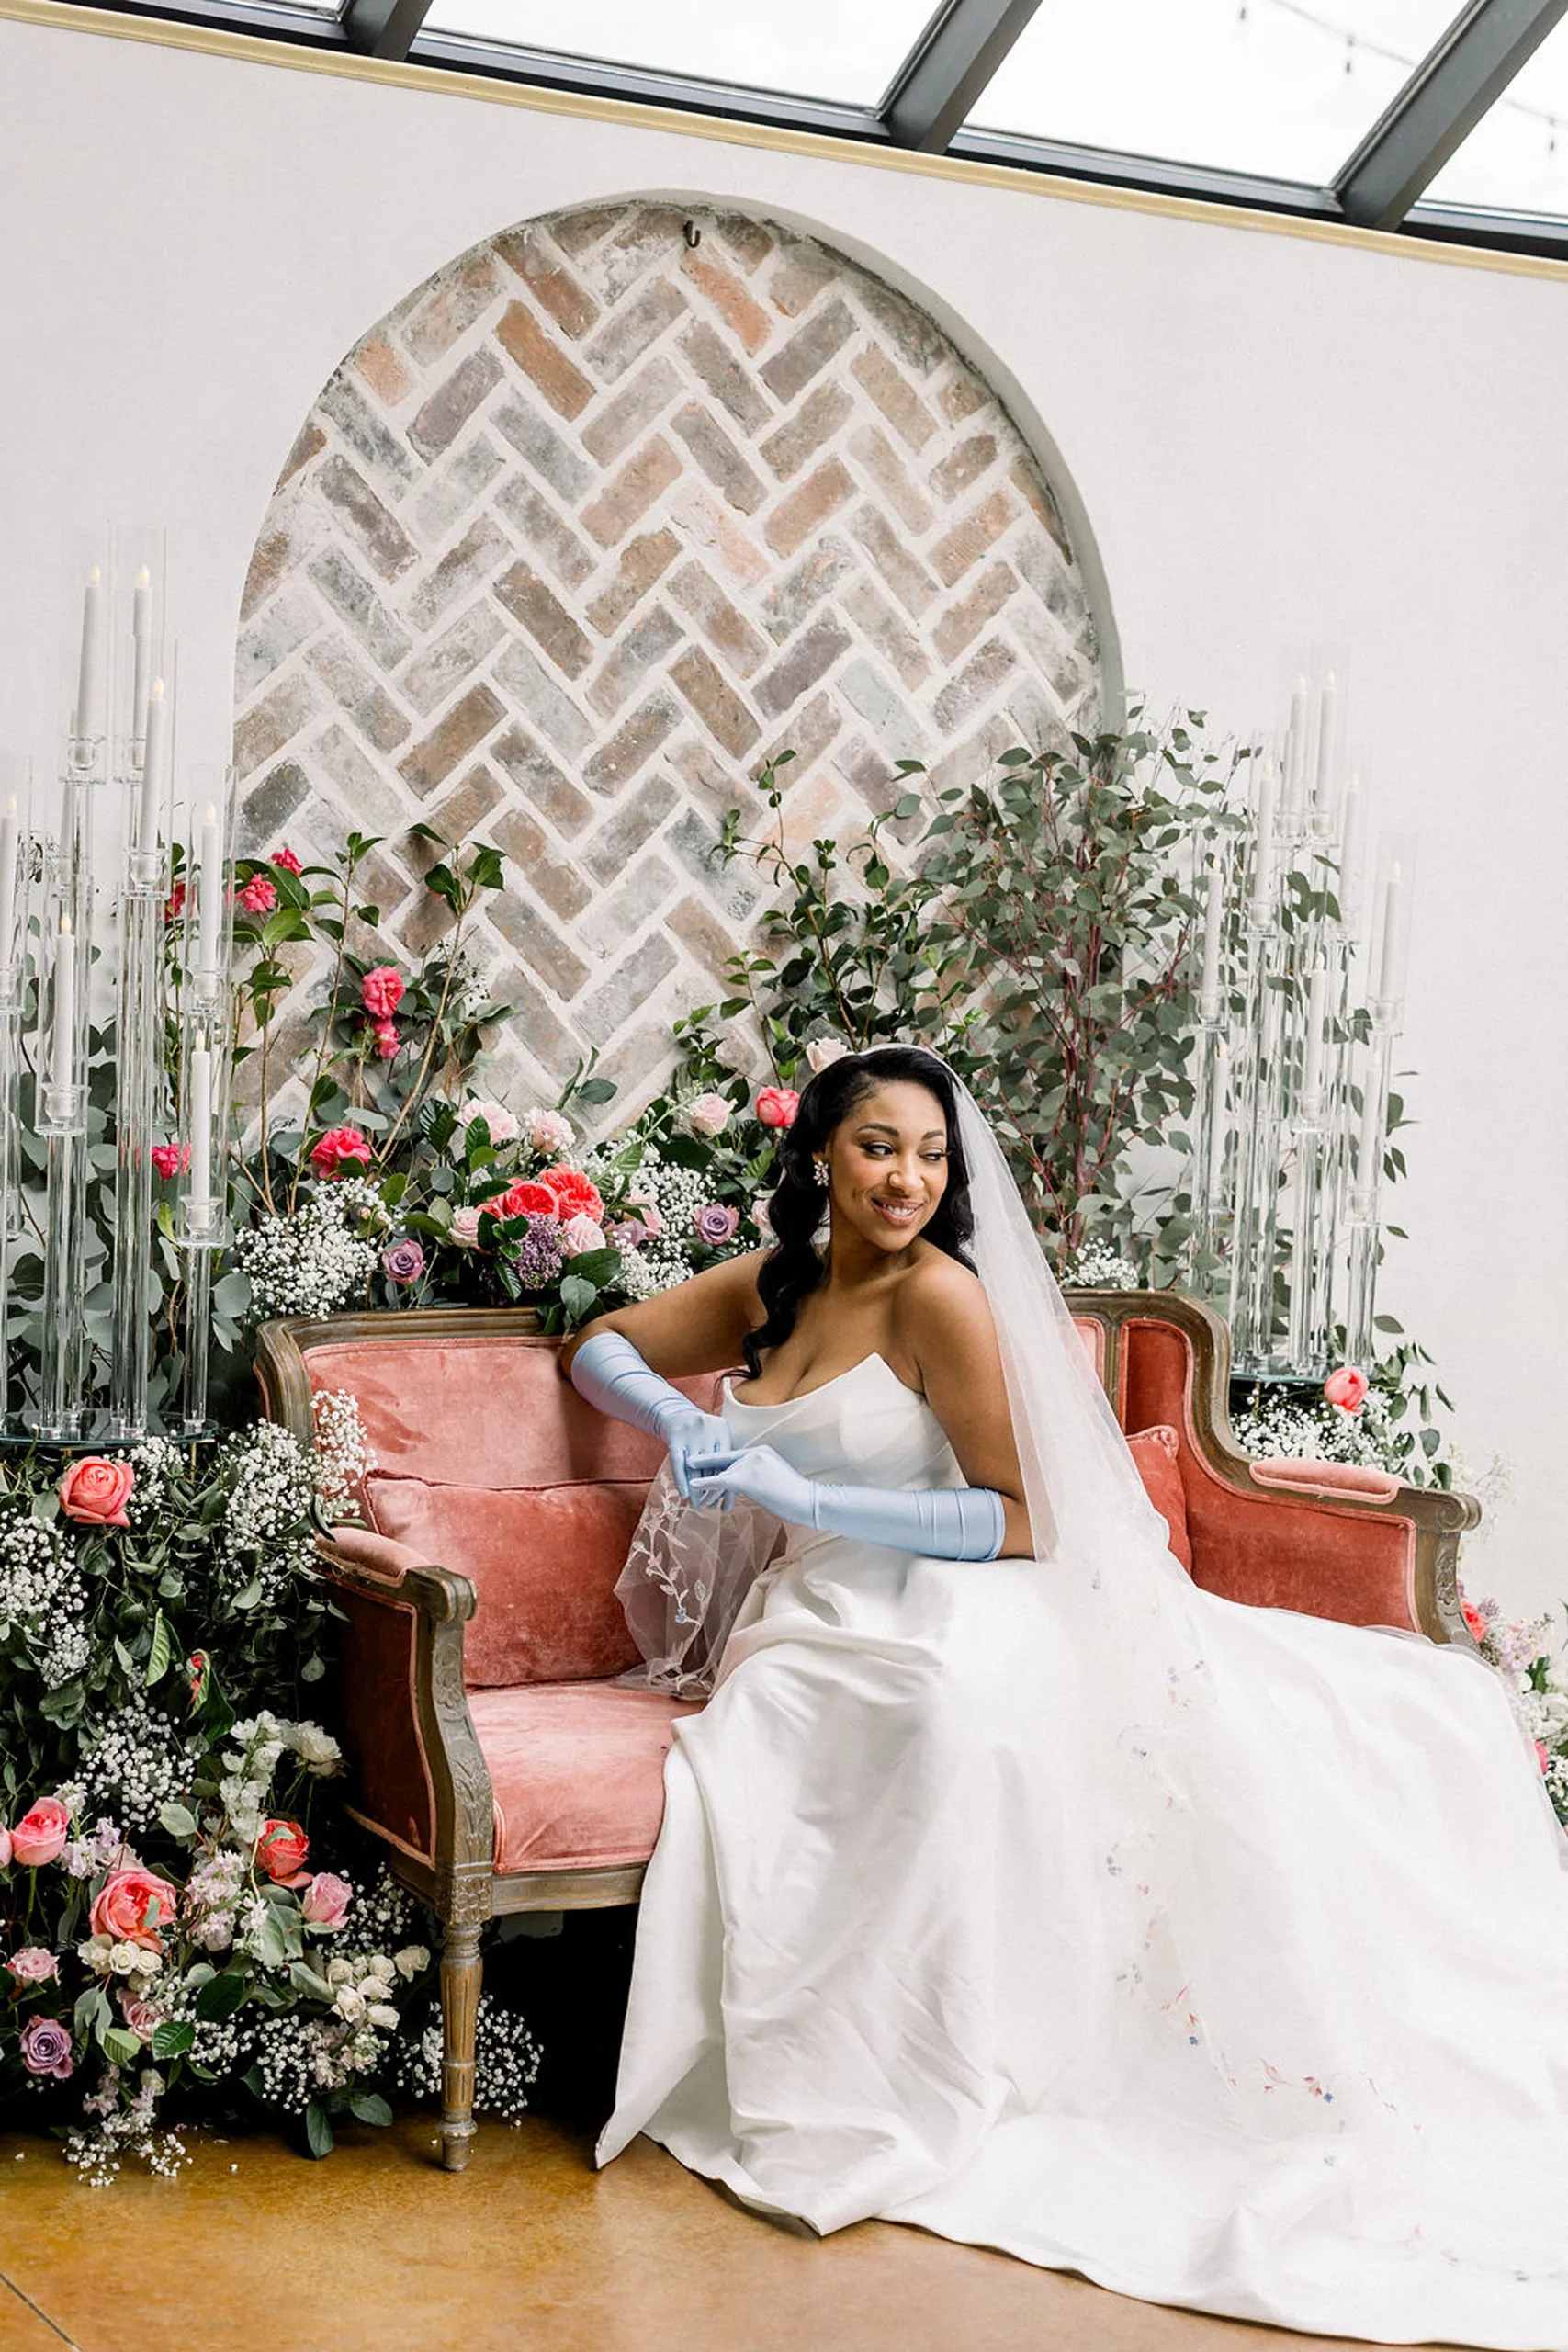 A bride smiles down her shoulder while sitting on a pink couch surrounded by flowers and candles